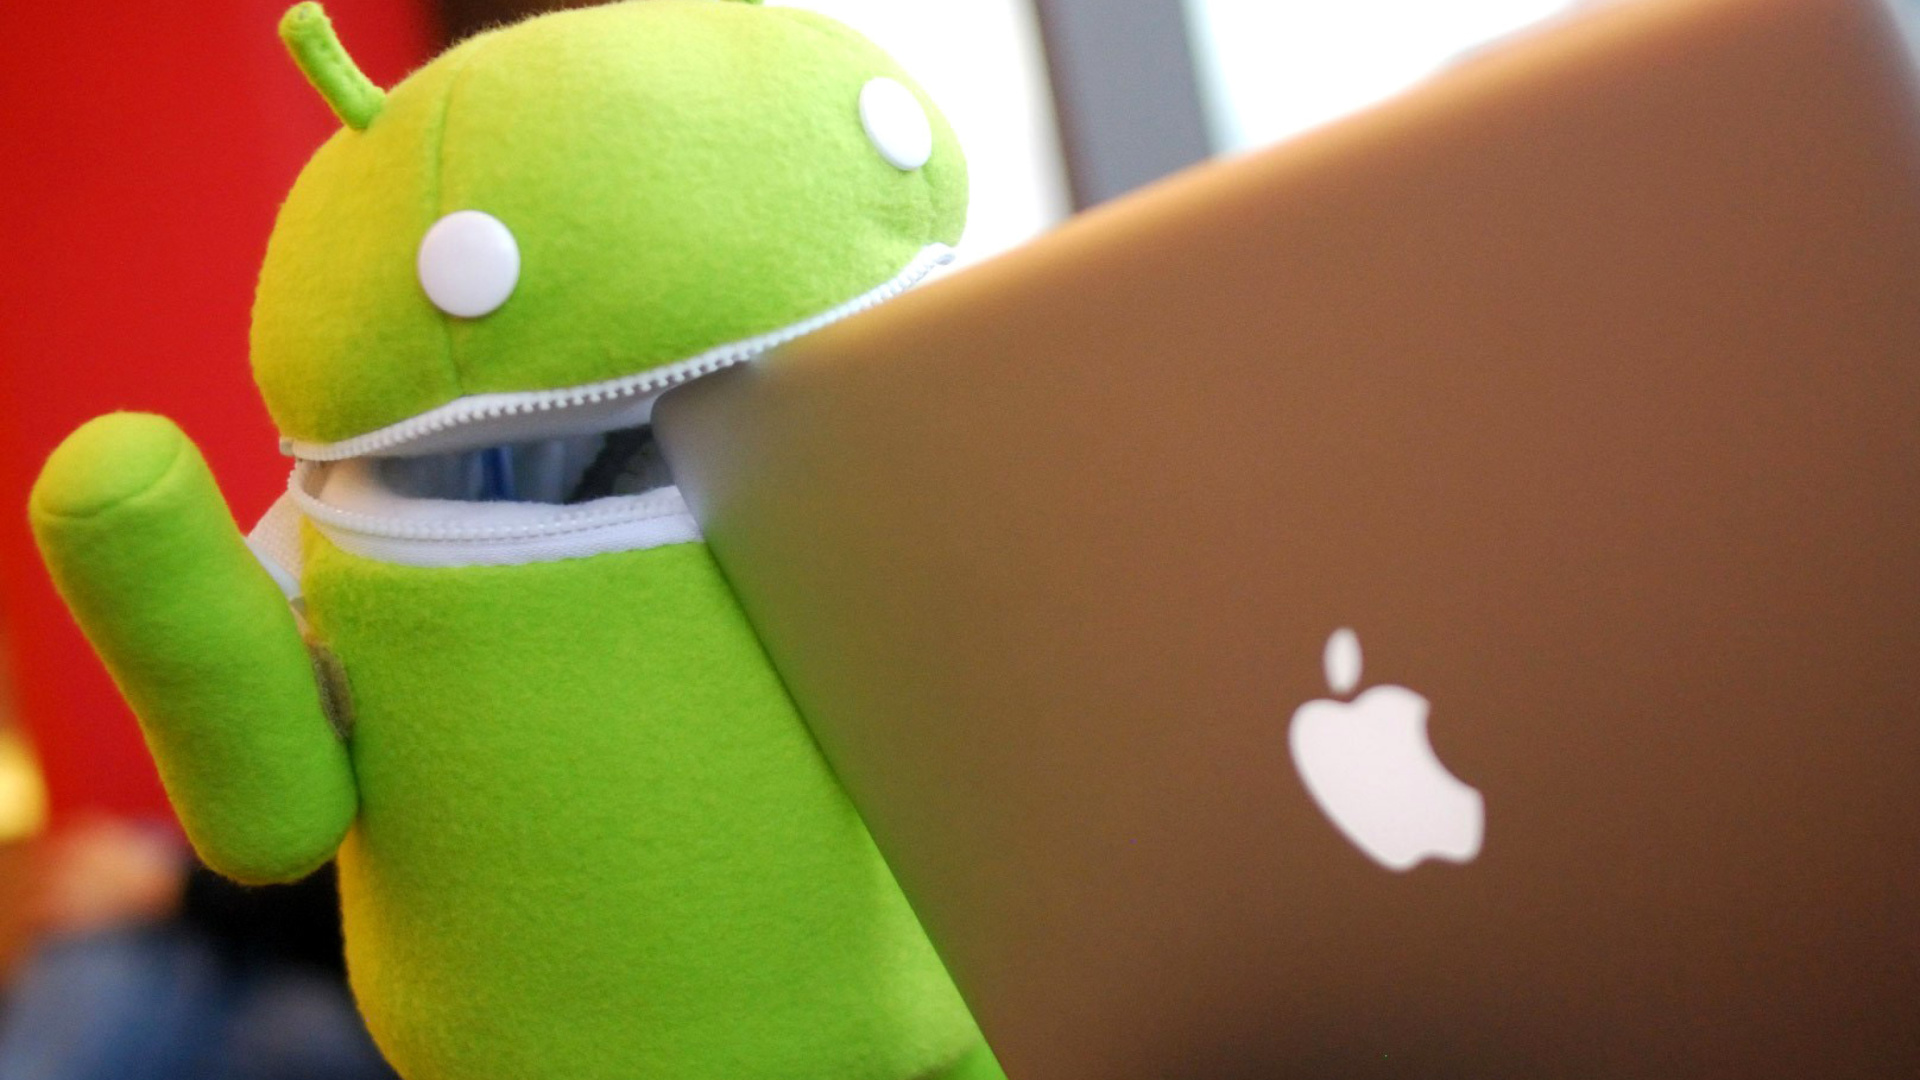 Android Robot and Apple MacBook Air Laptop wallpaper 1920x1080